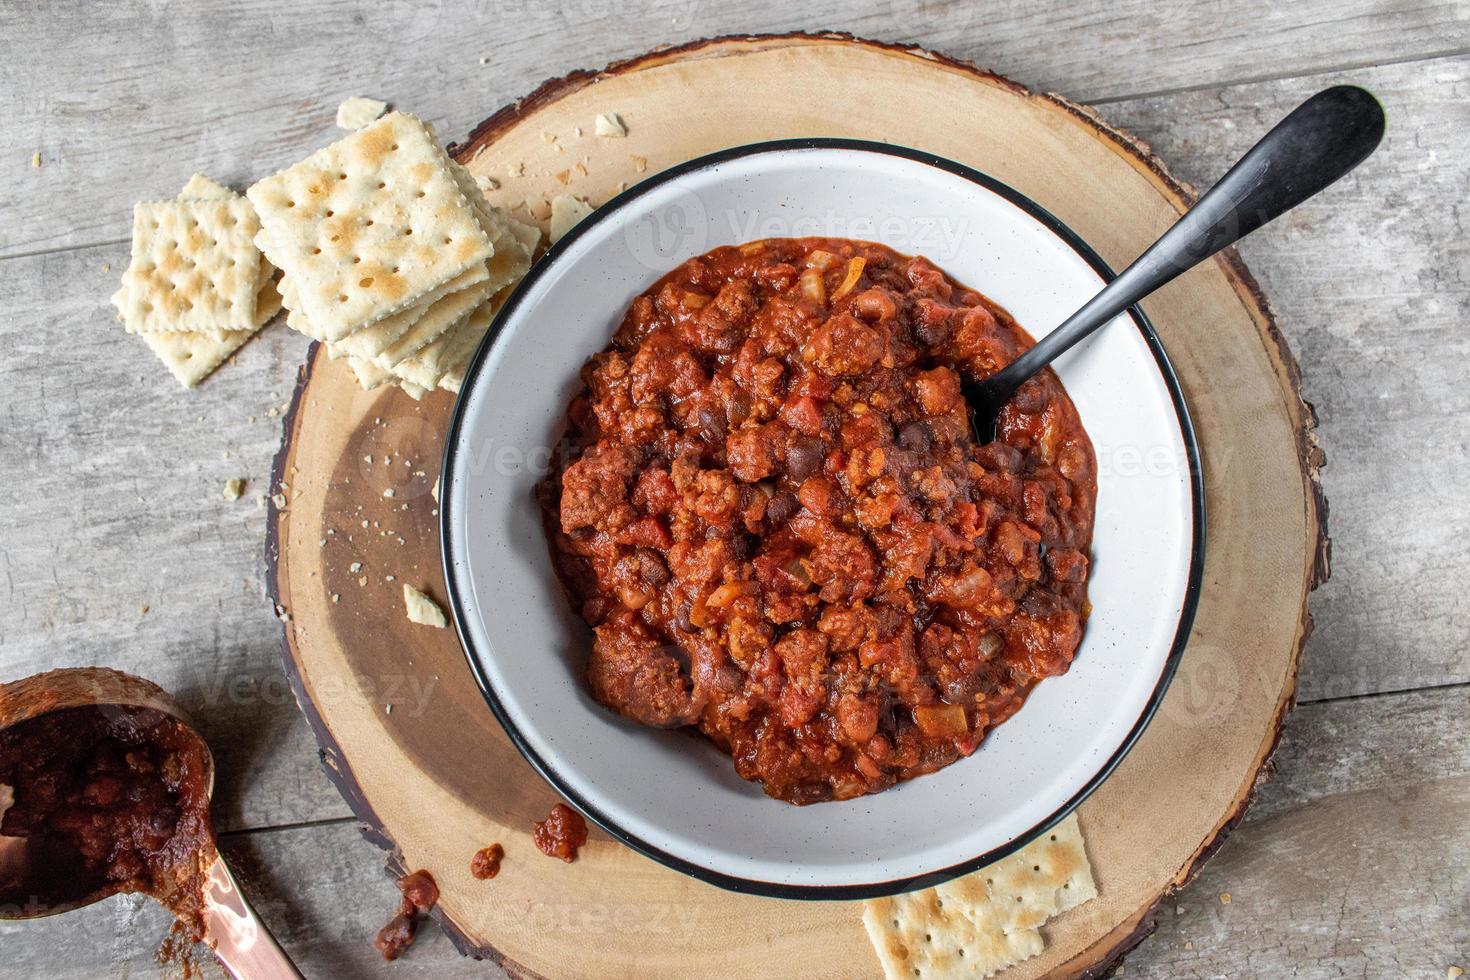 warm bowl of chili and beans with crackers in rustic setting flat lay photo